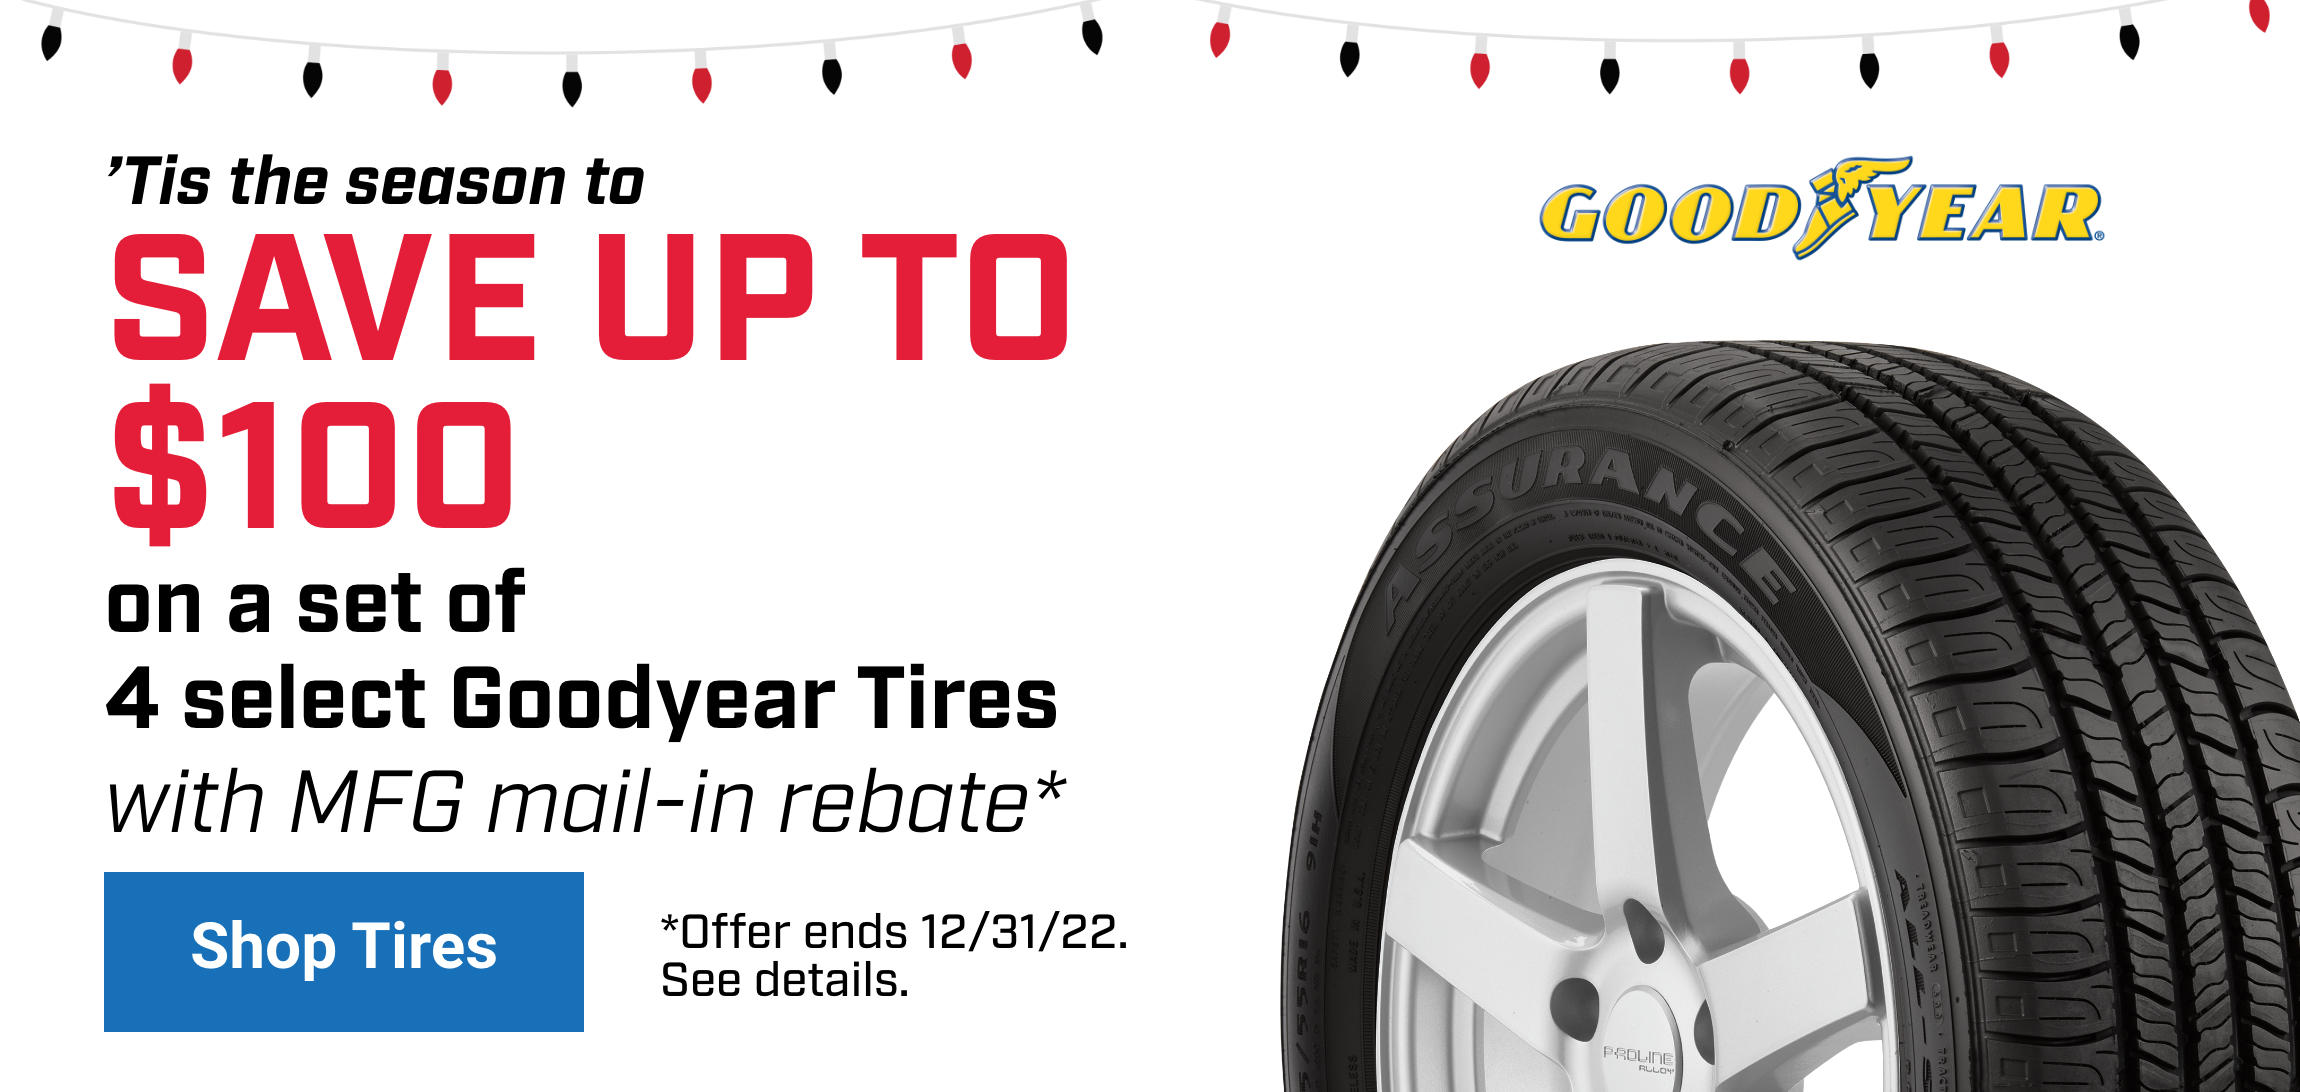 Save up to $100 on Goodyear Tires